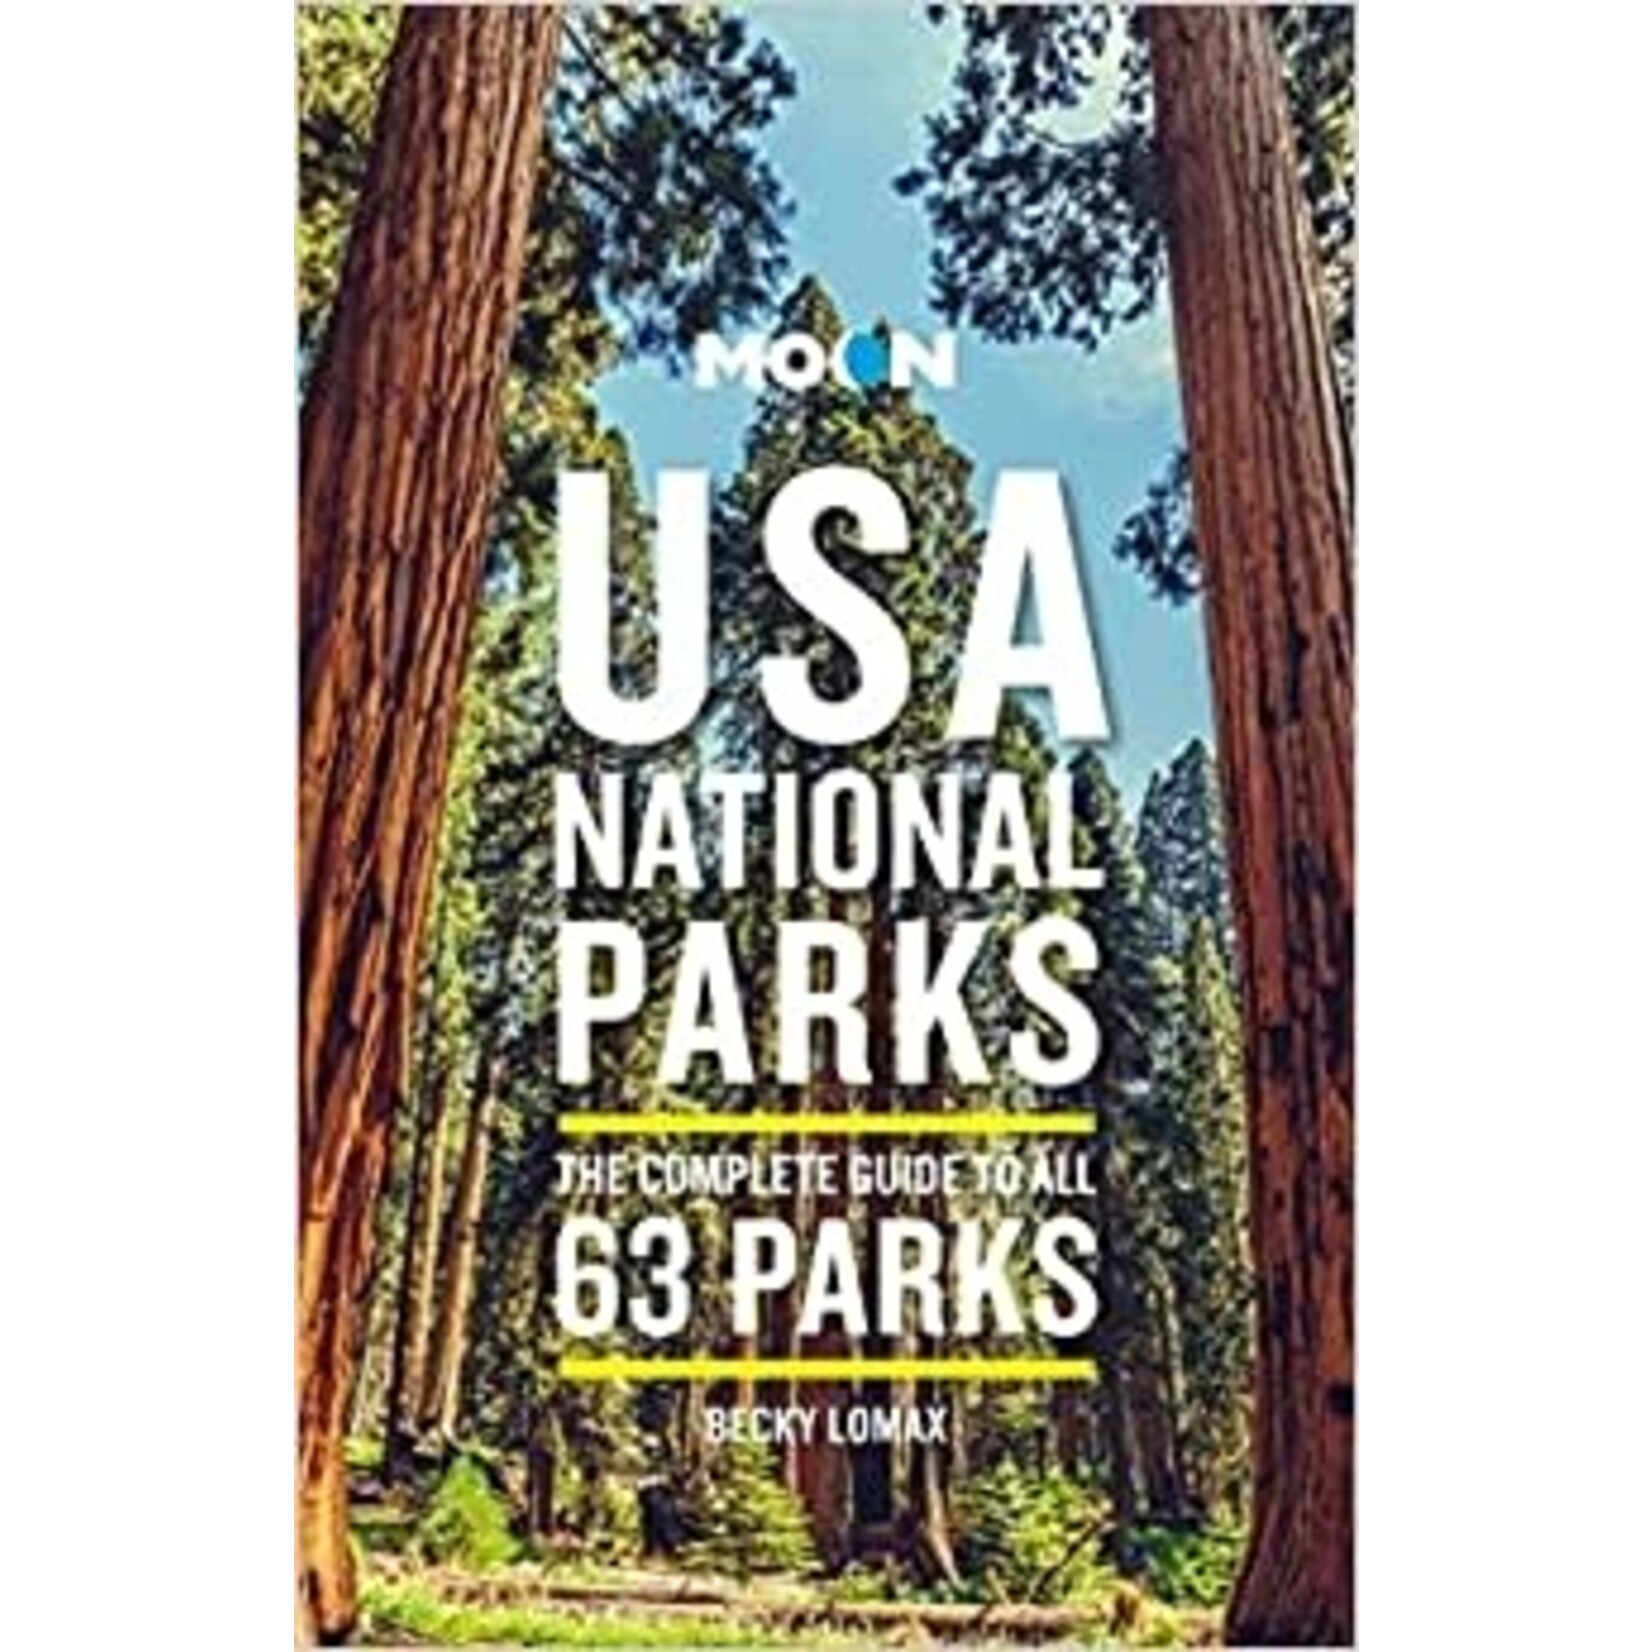 Moon USA National Parks: the Complete Guide to all 63 Parks